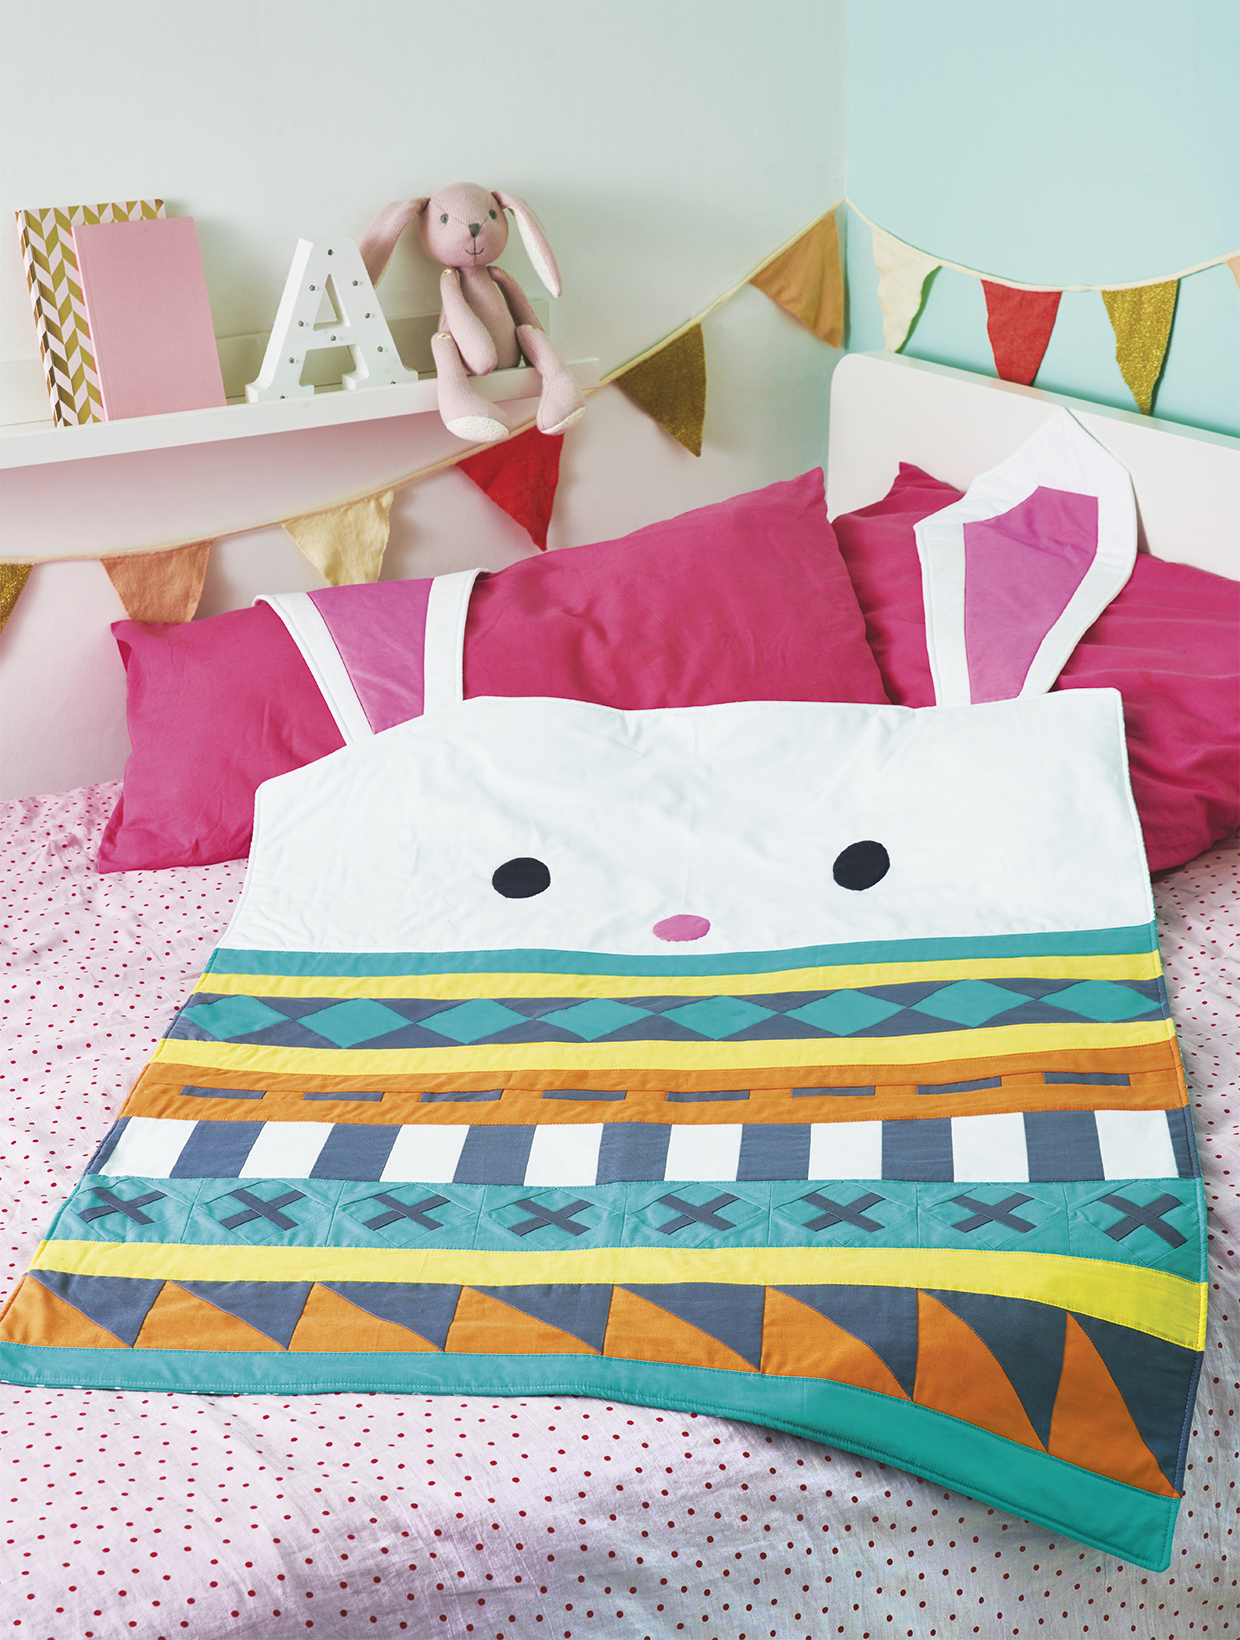 Free bunny quilt pattern